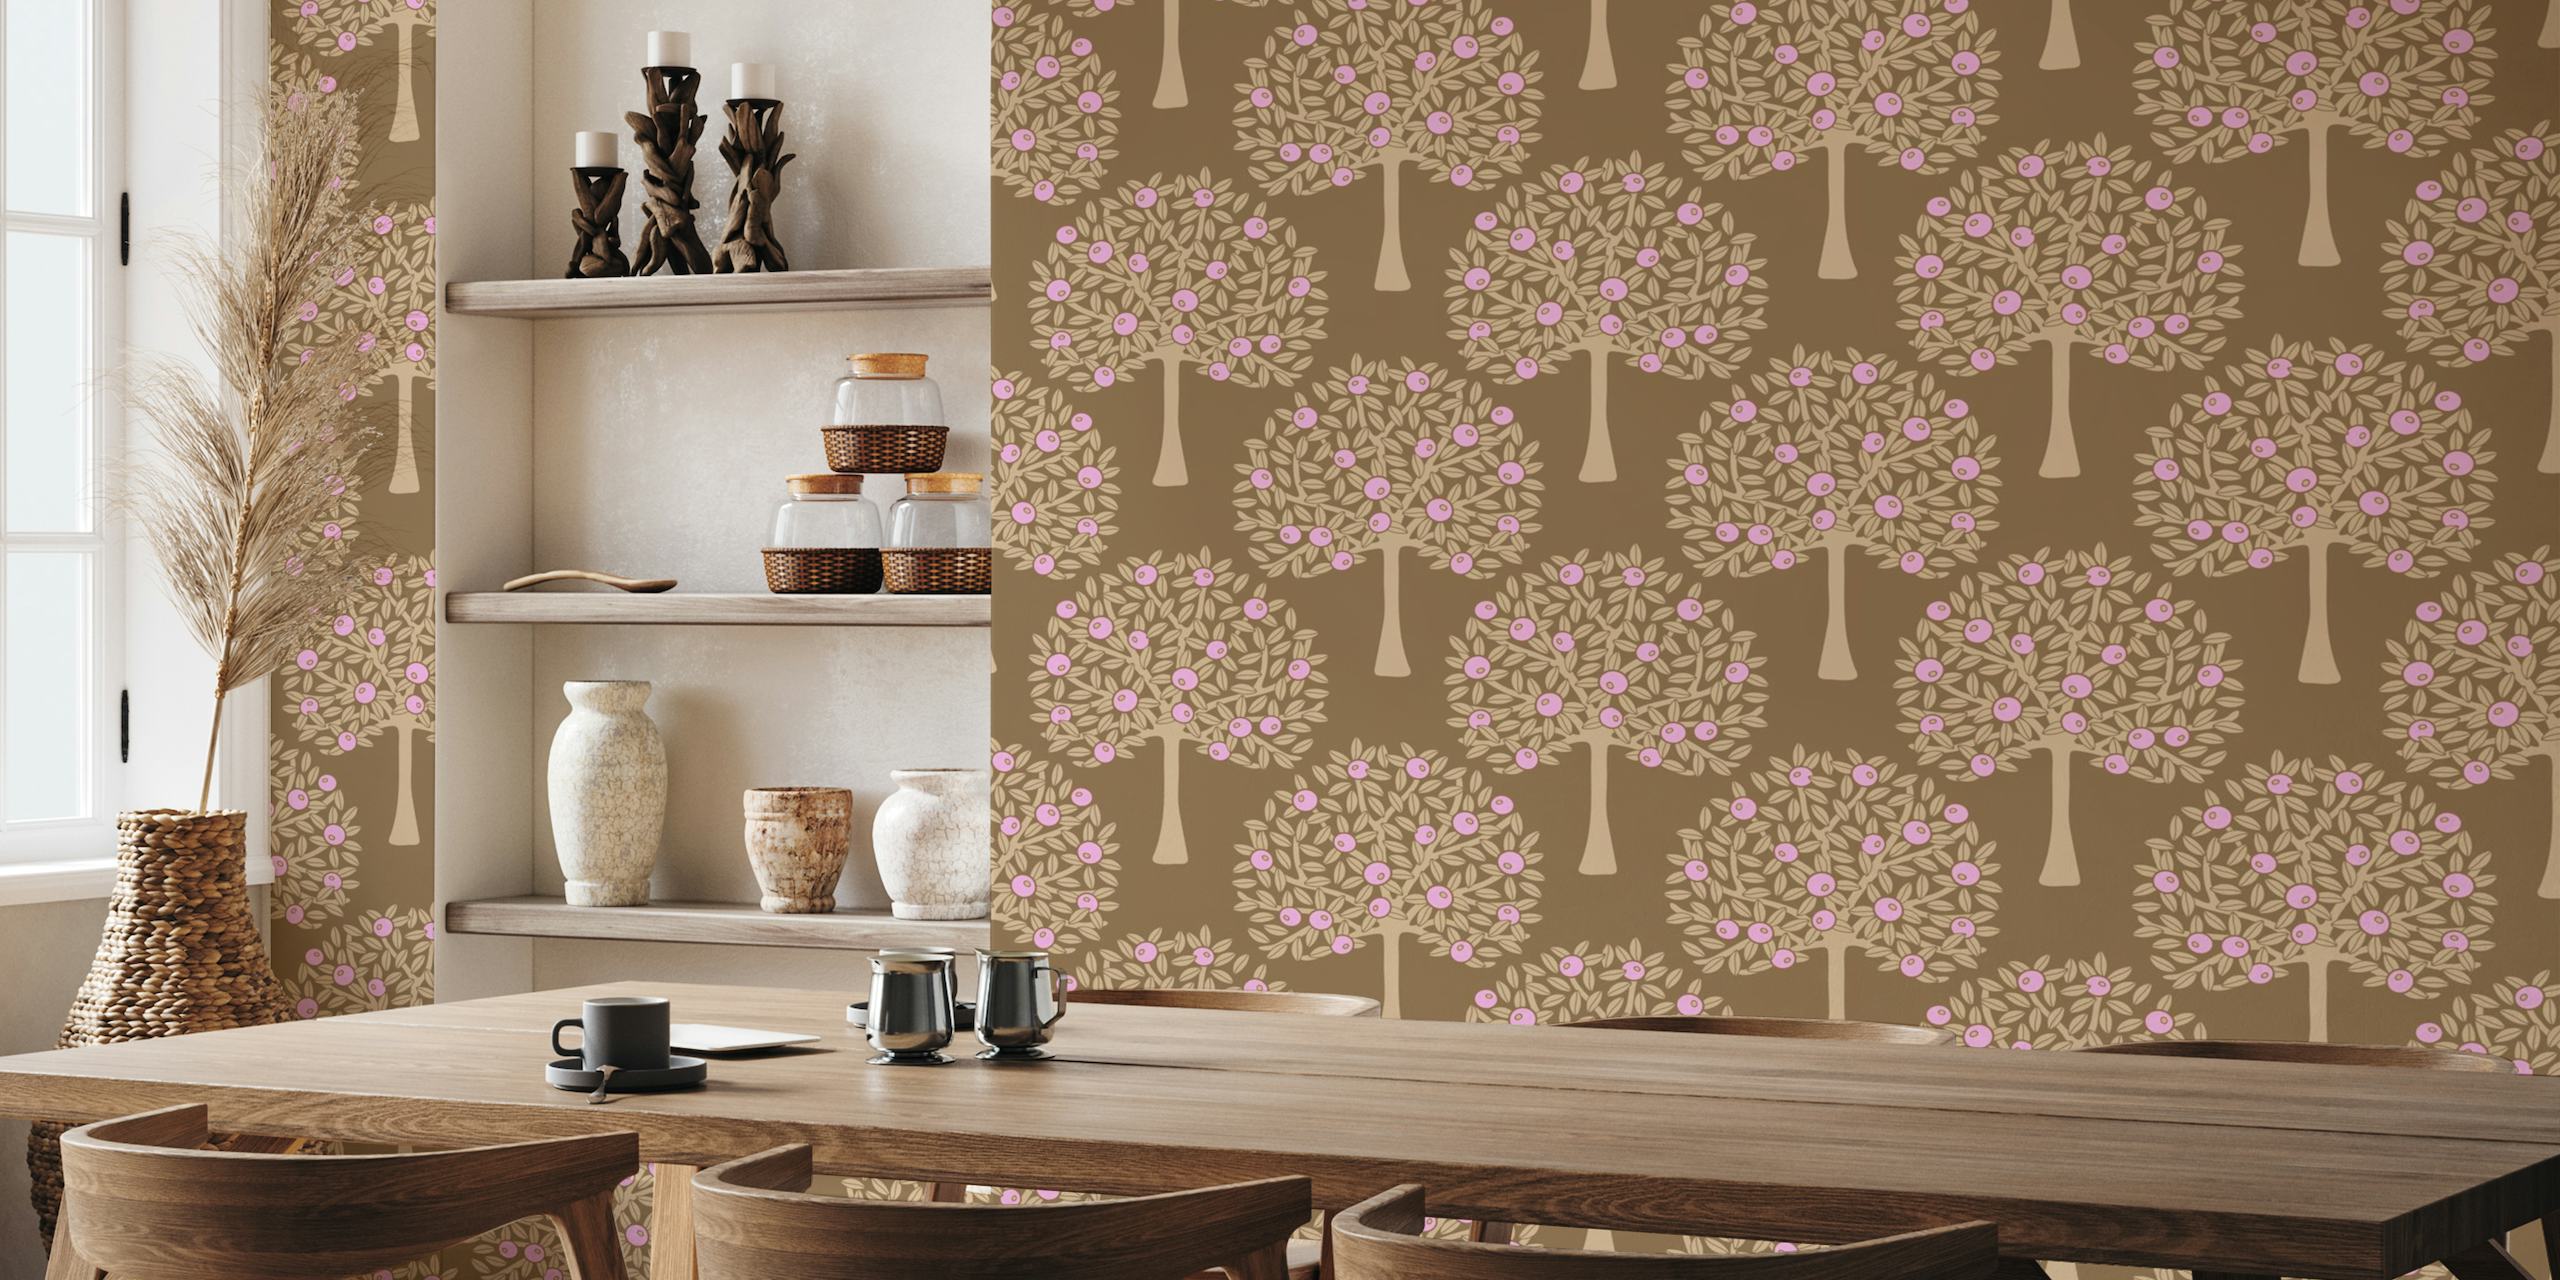 ORANGERIE Citrus Fruit Tree wall mural with pink blossoms on a brown background